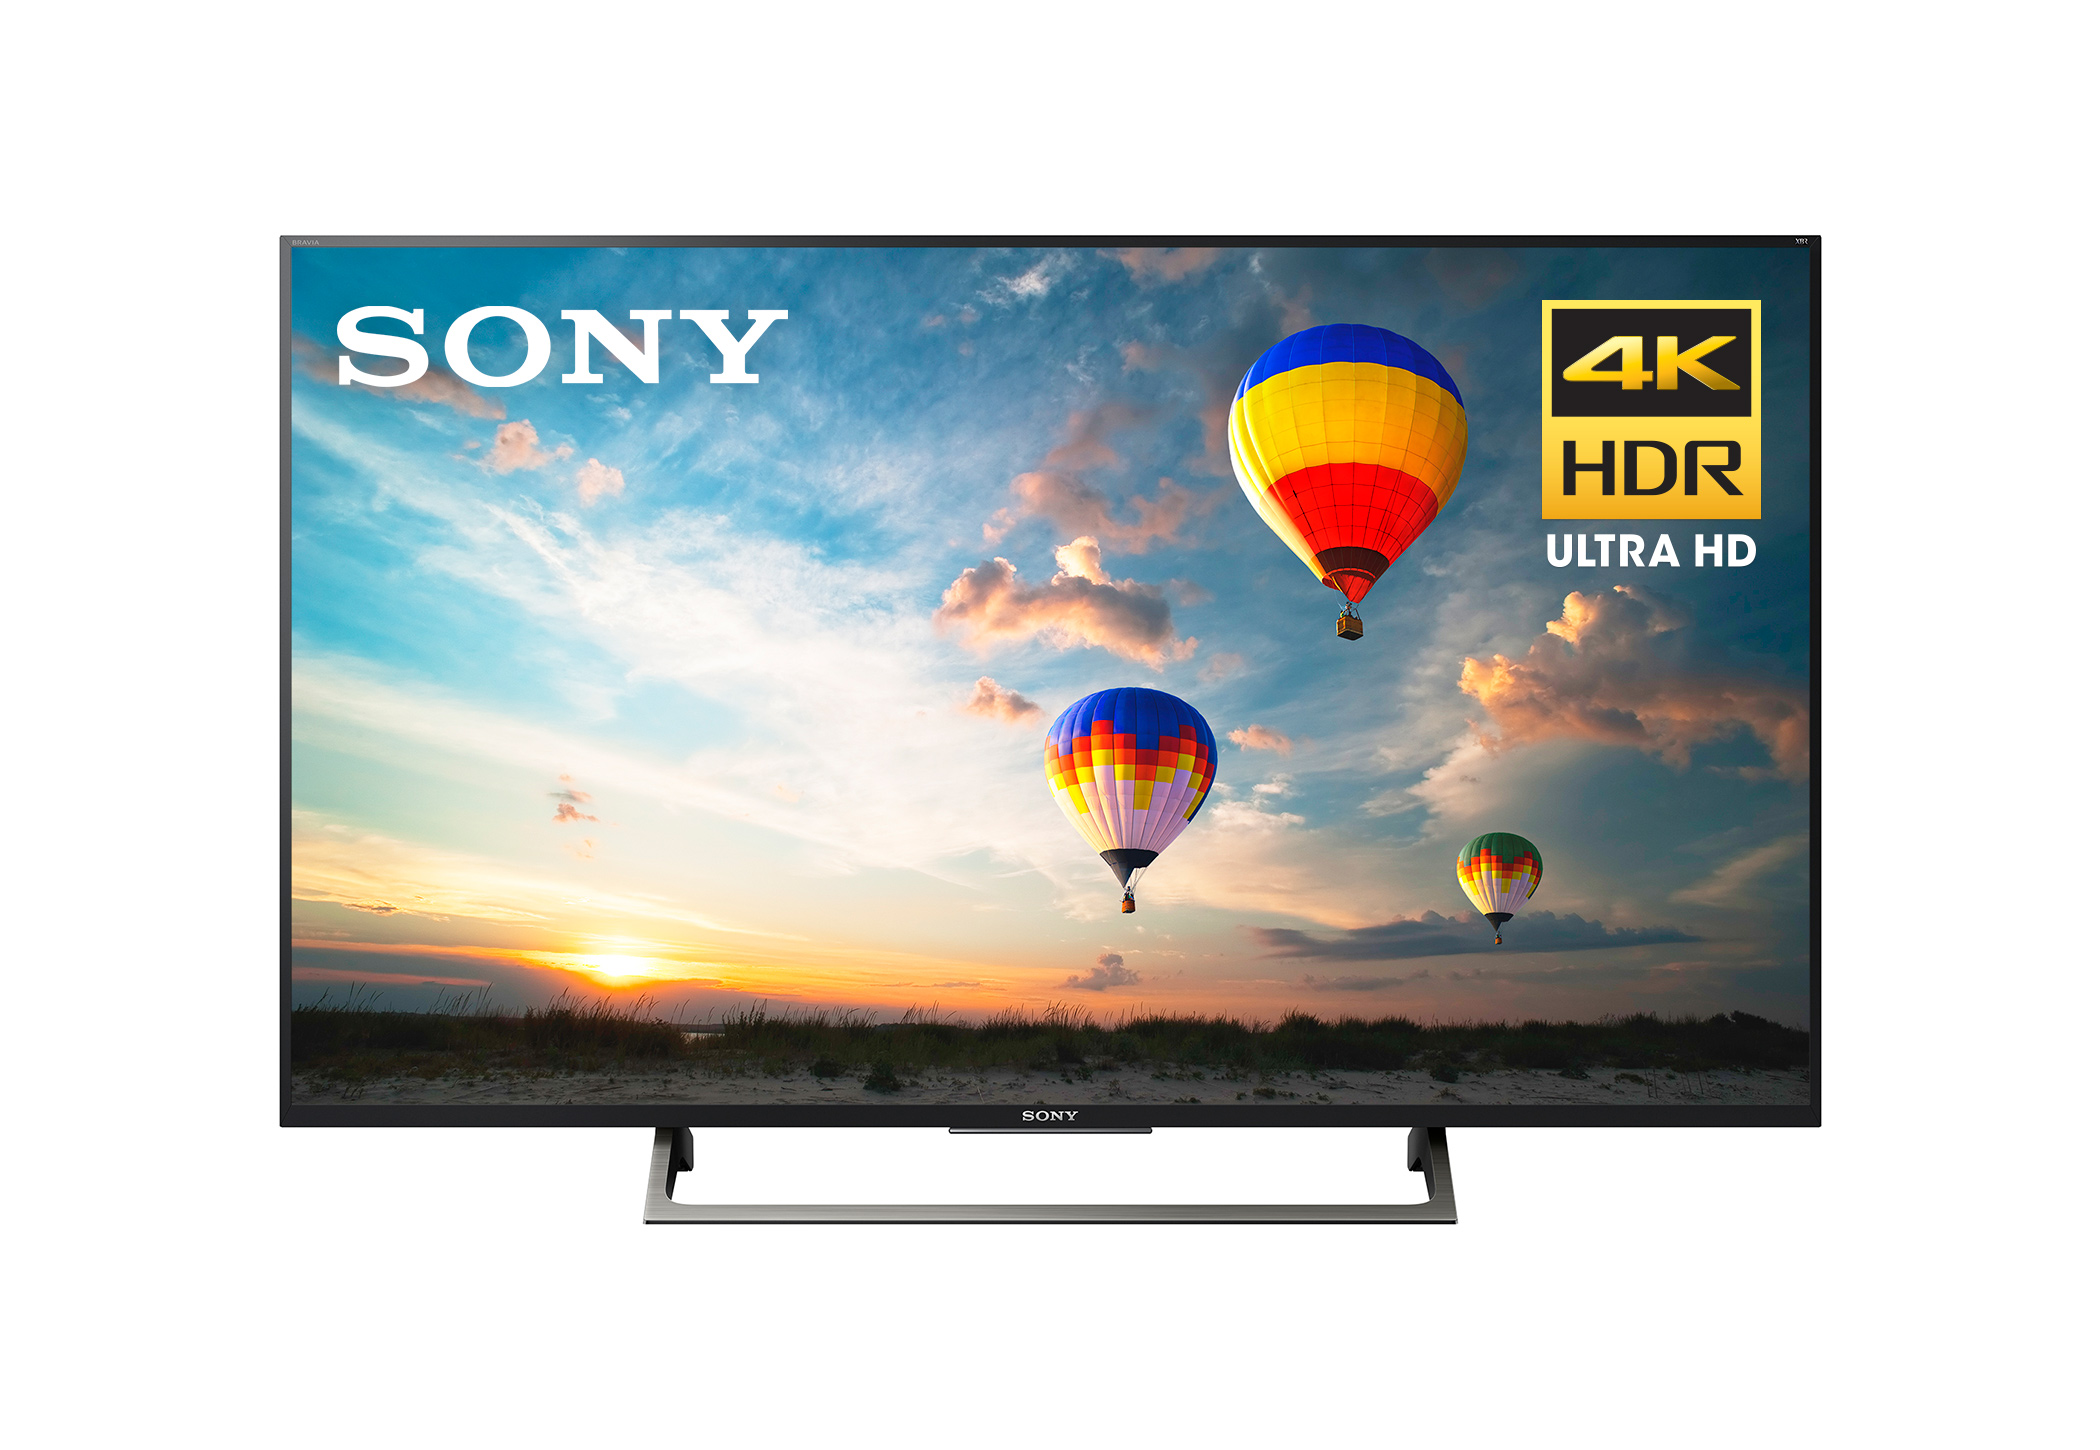 Sony 49" Class 4K UHD LED Android Smart TV HDR BRAVIA 800E Series XBR49X800E - image 1 of 14